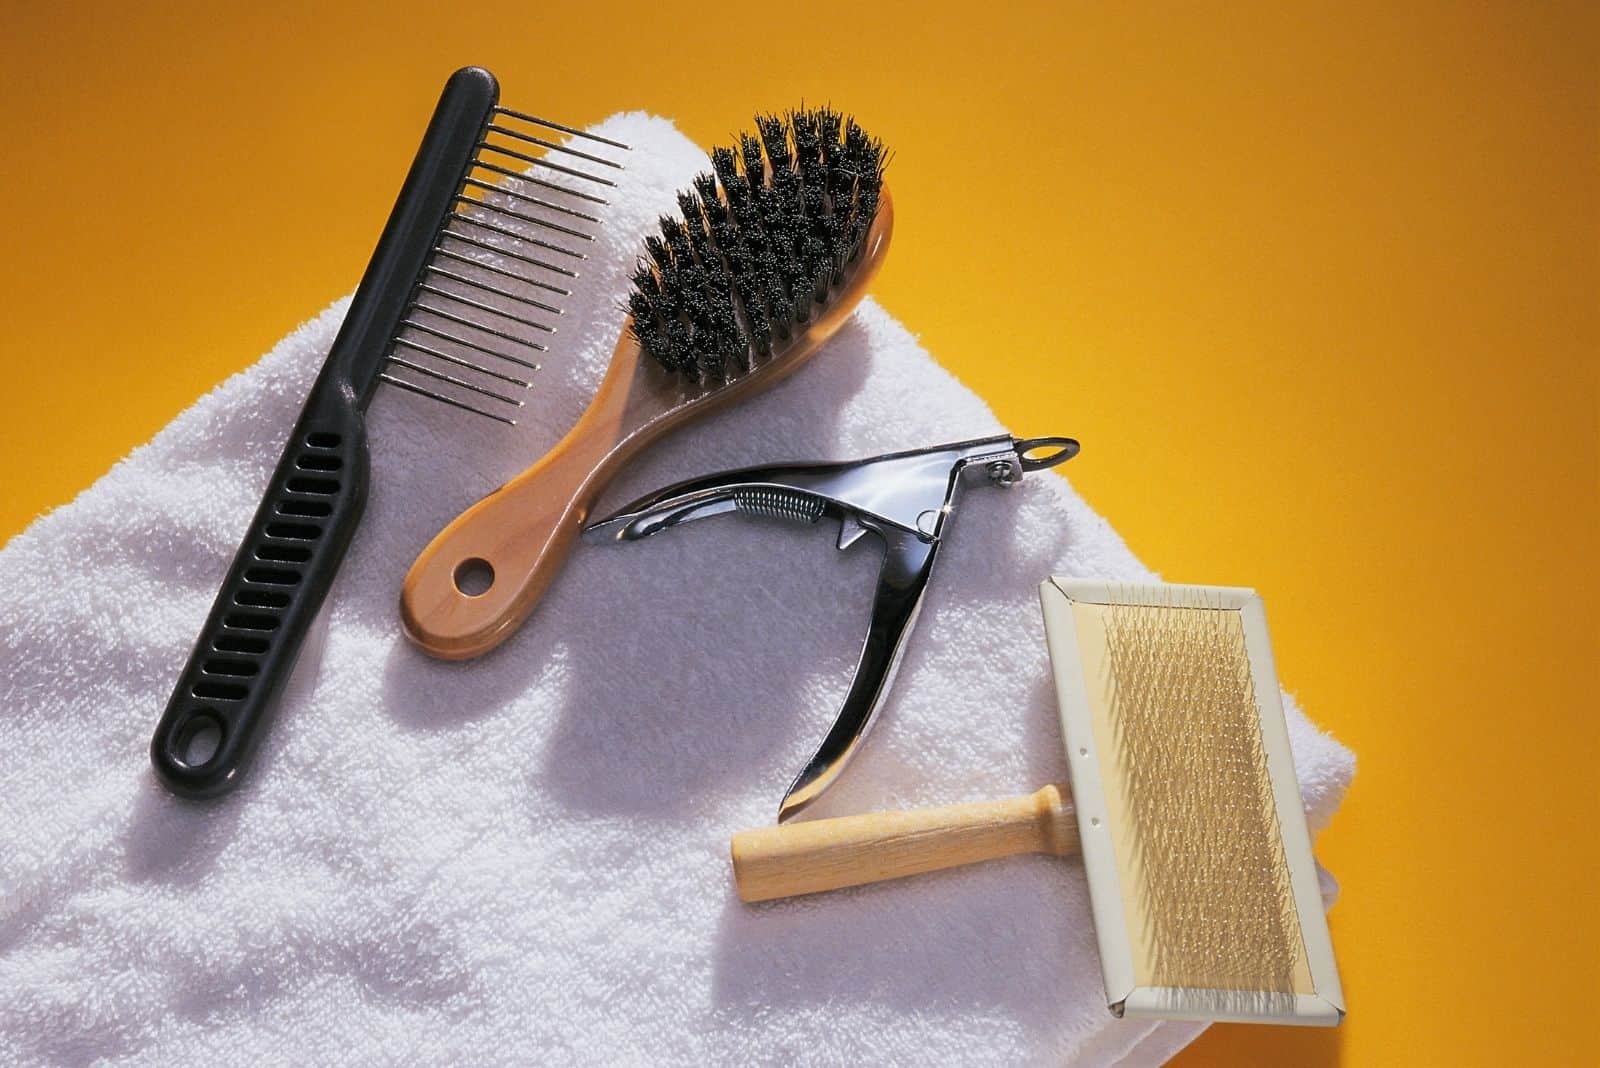 dog grooming tools placed in the white towel